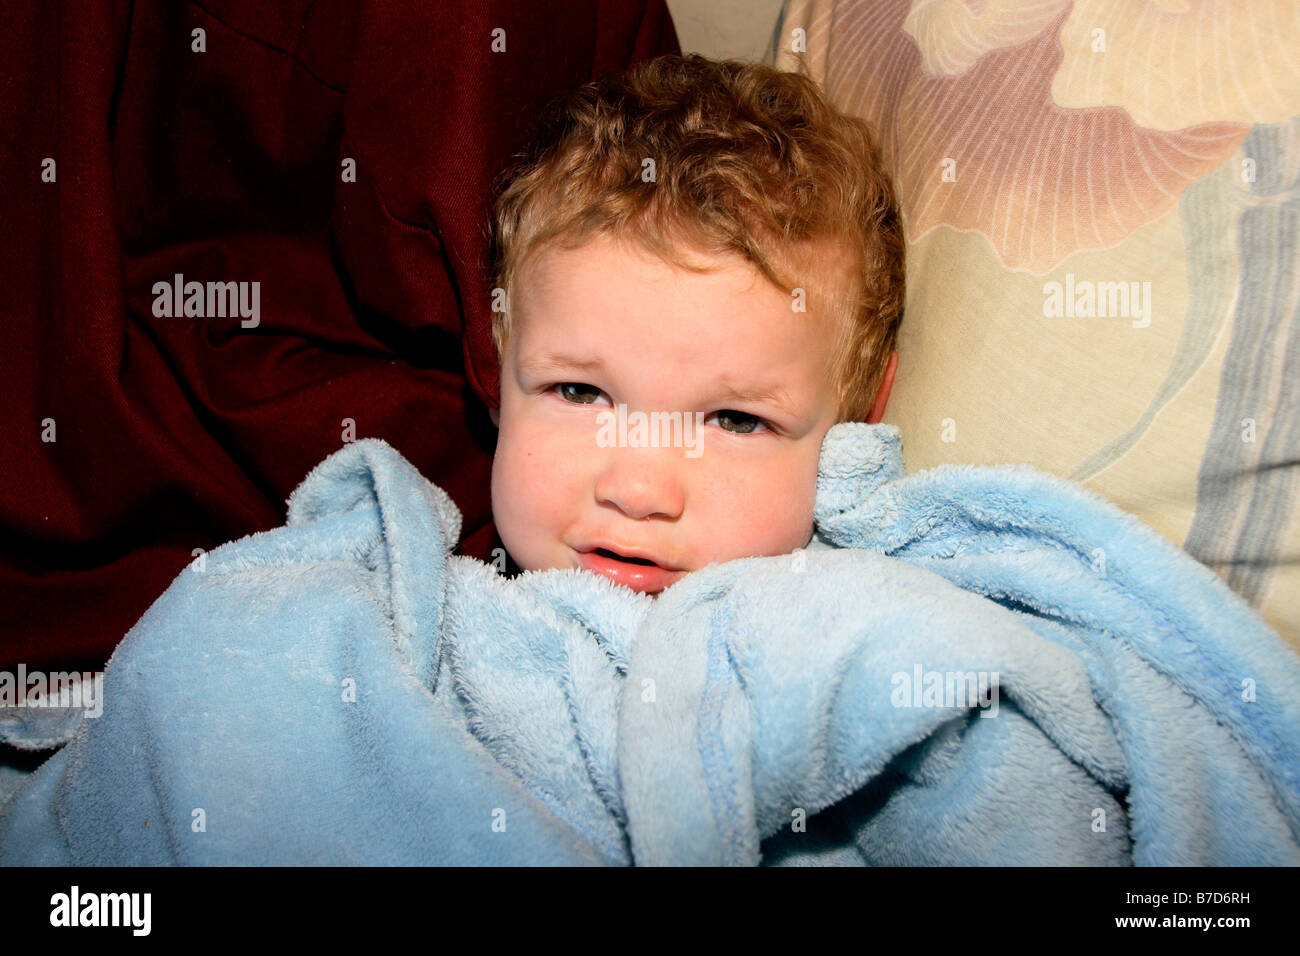 a sick 2 year old boy Stock Photo